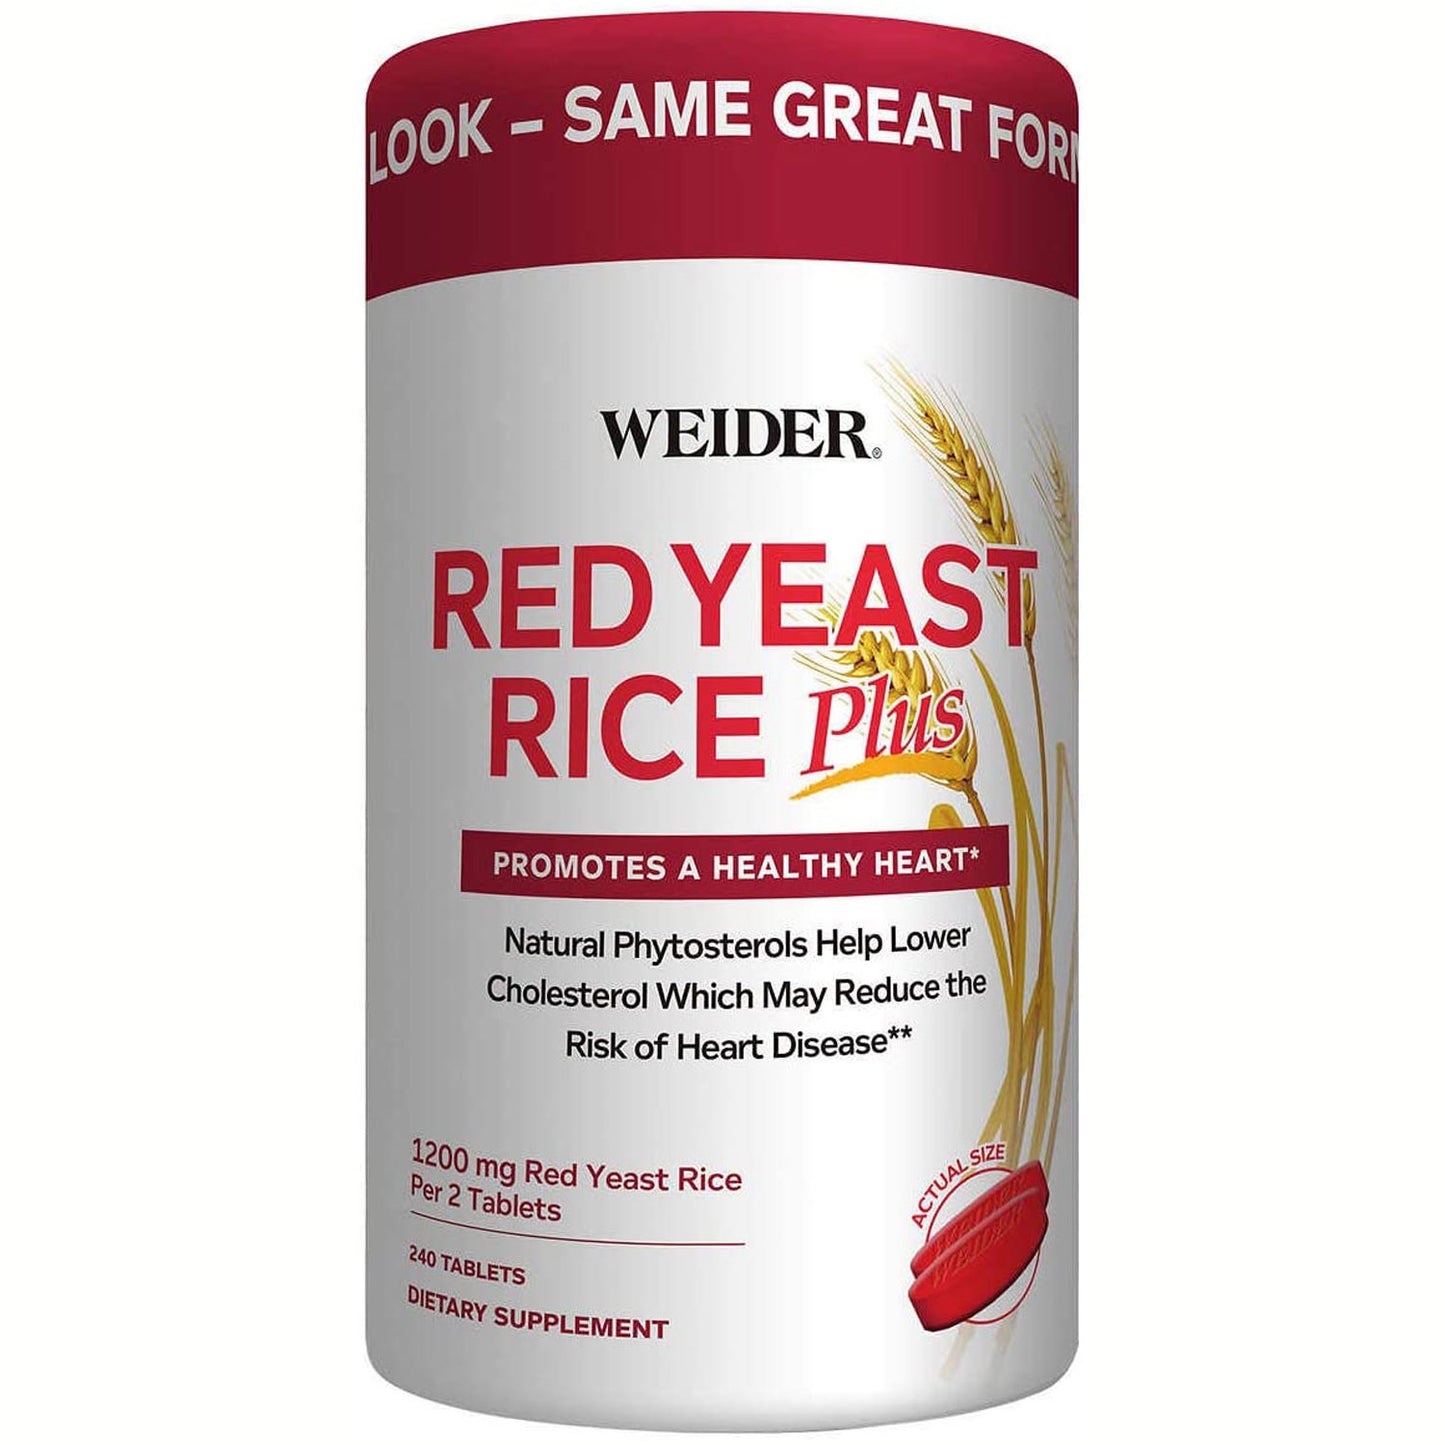 Weider Red Yeast Rice Plus with Phytosterols 1200 mg per 2 Tablets (240 Tablets)